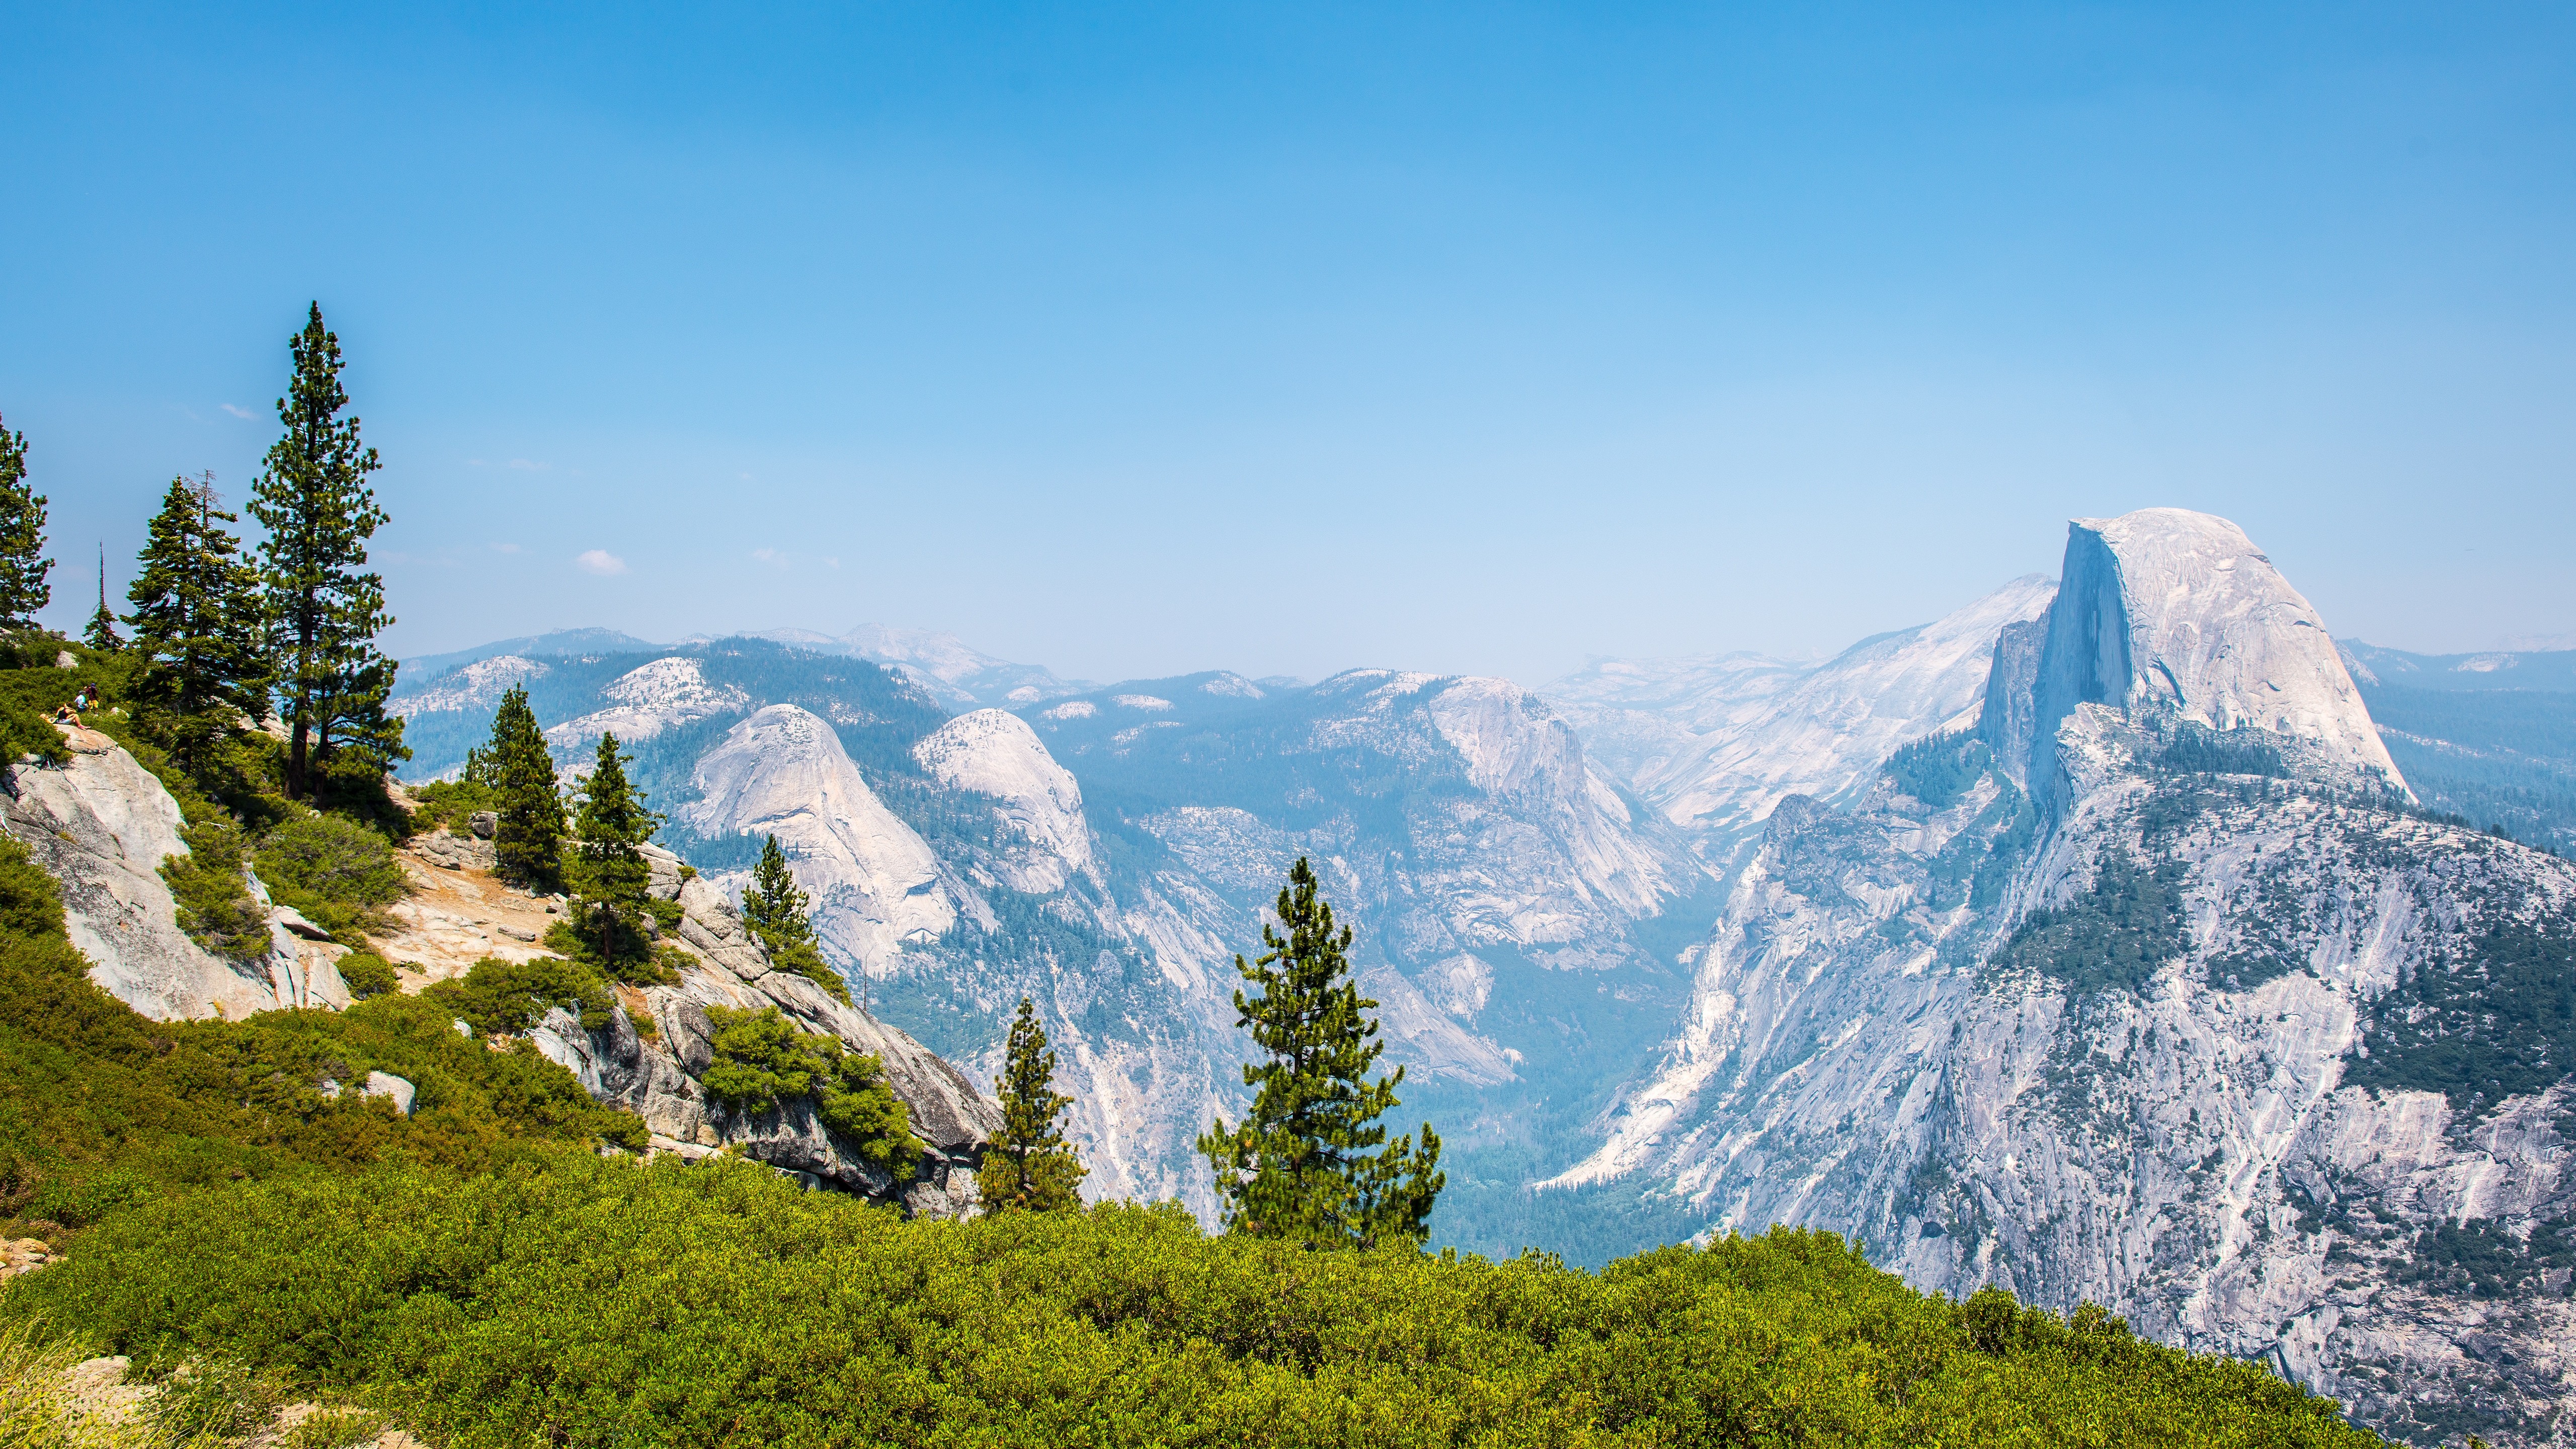 General 5120x2880 California Yosemite Valley landscape mountains daylight sky bright far view USA nature clear sky Half Dome Yosemite National Park Glacier Point